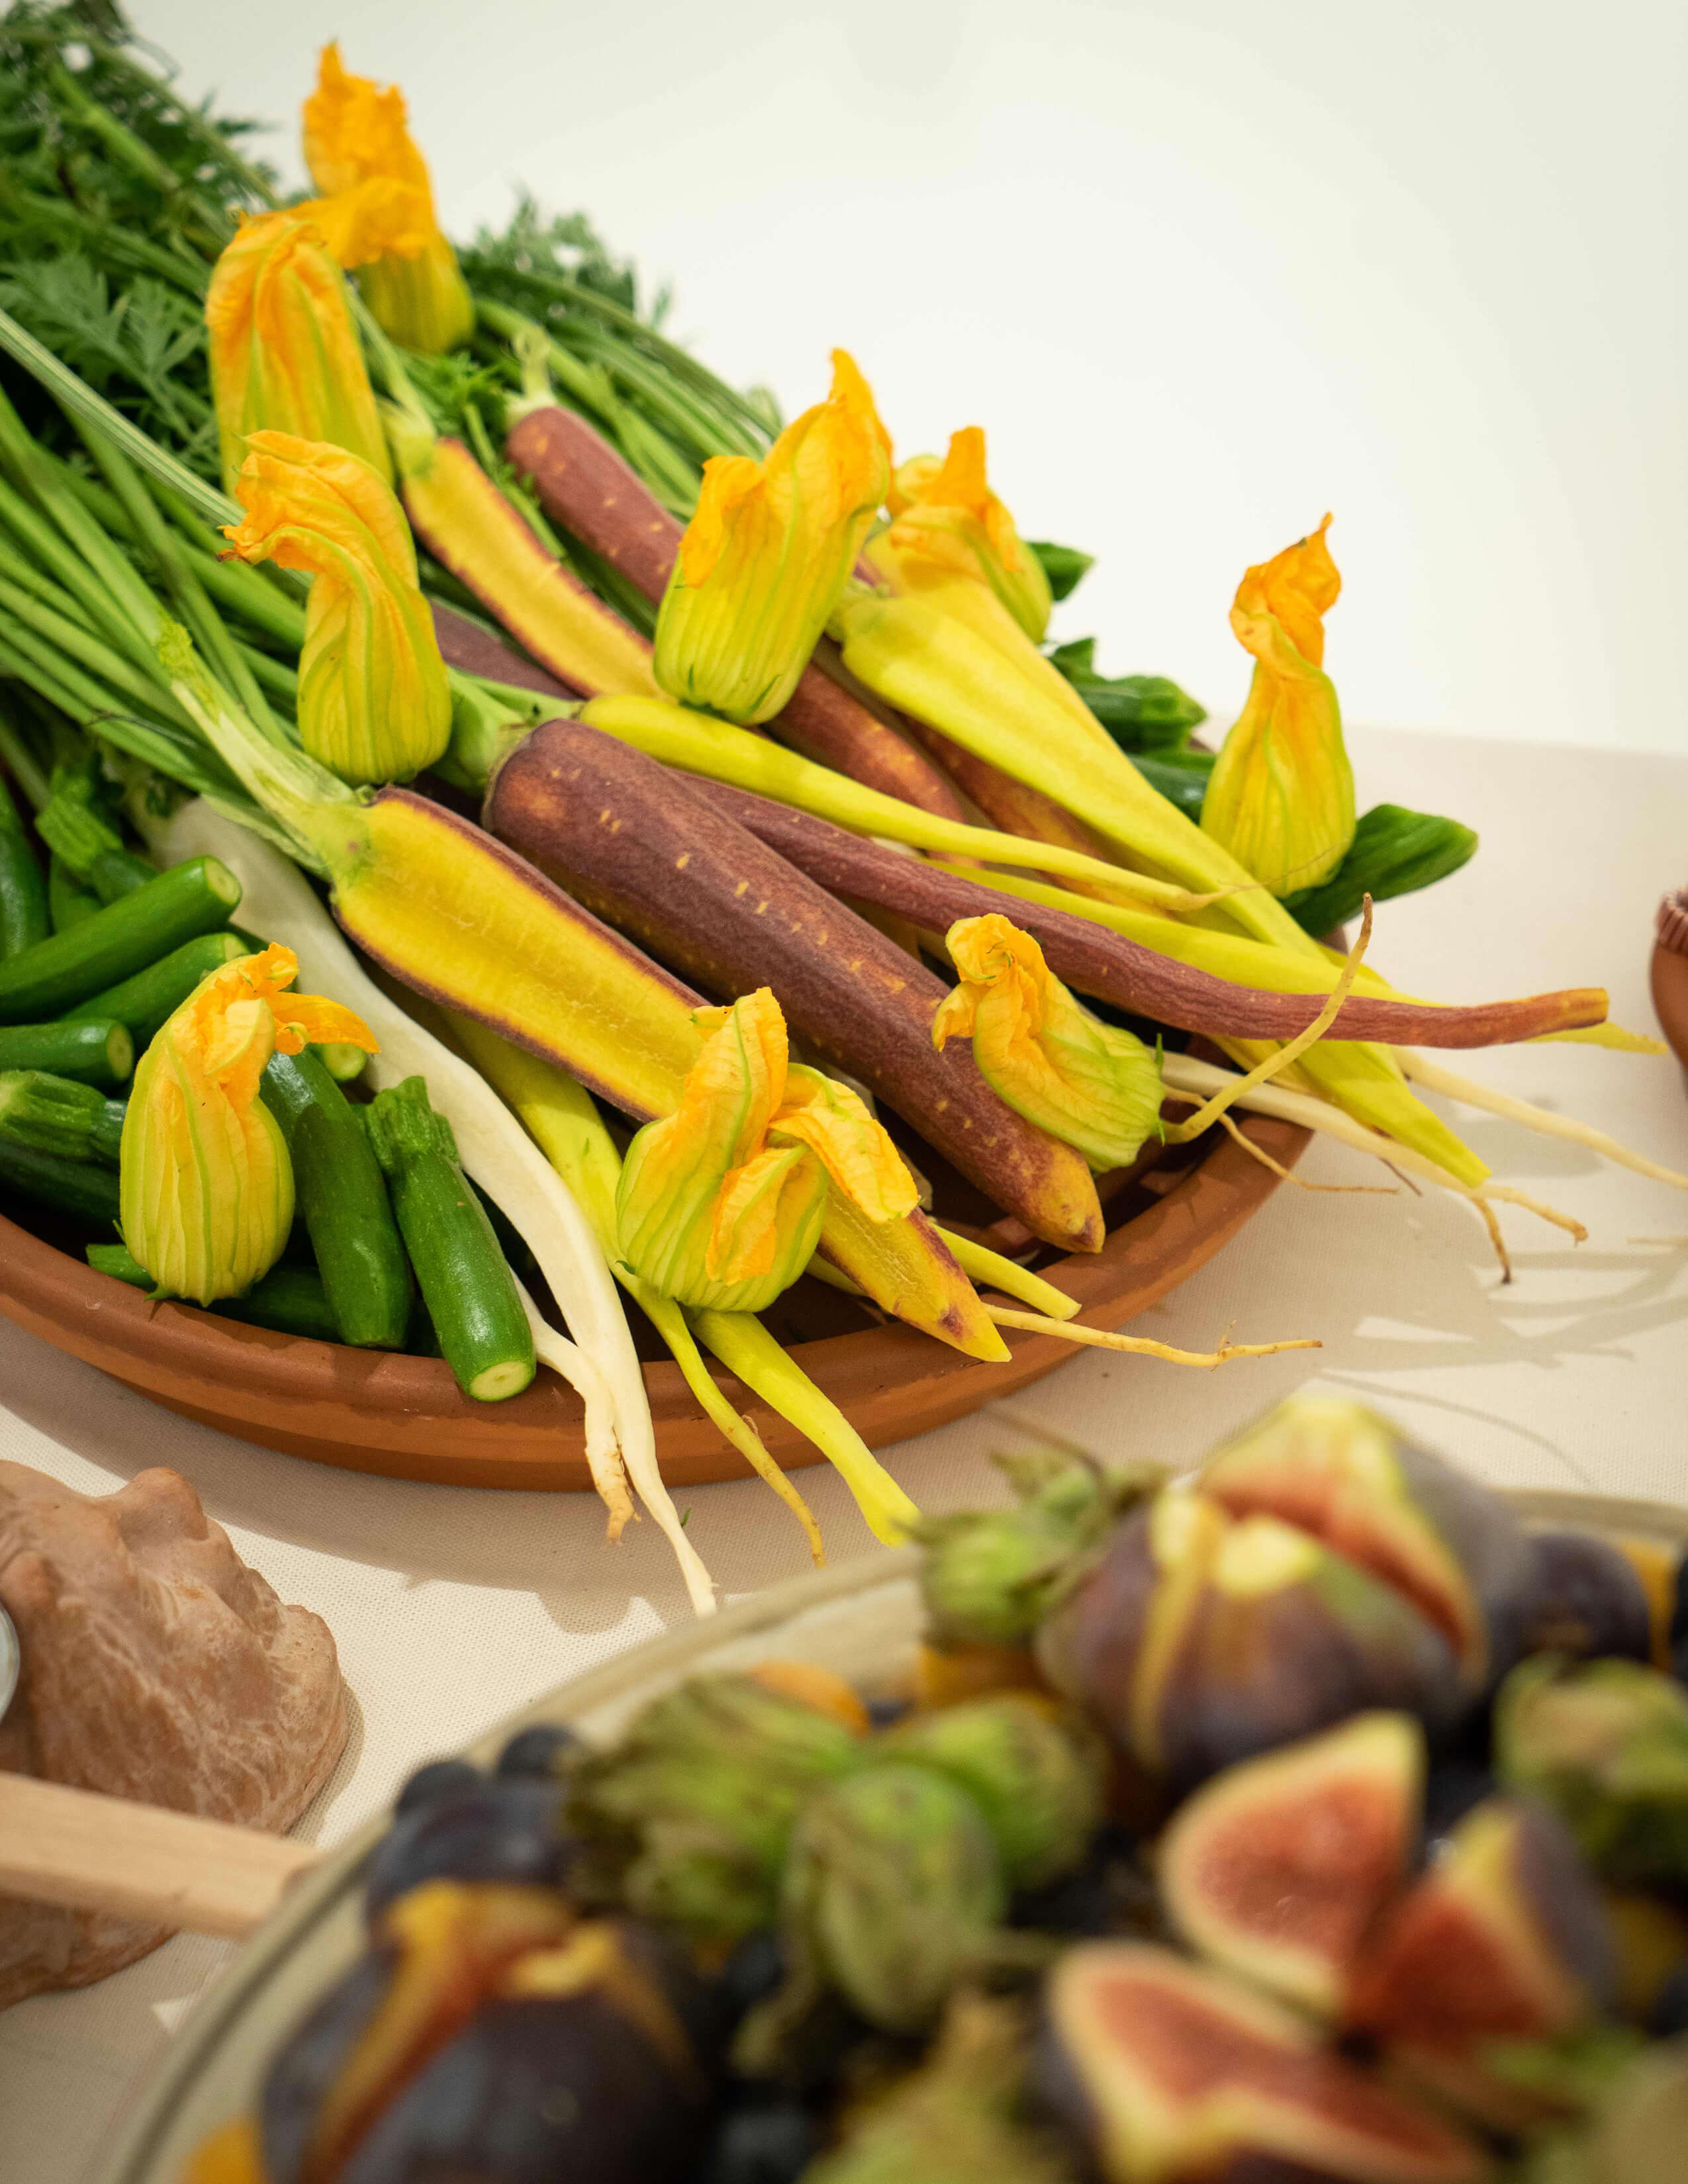 A plate of carrots with stems on it, squash blossoms and zucchinis. Below in the corner, there are figs and other fruits.